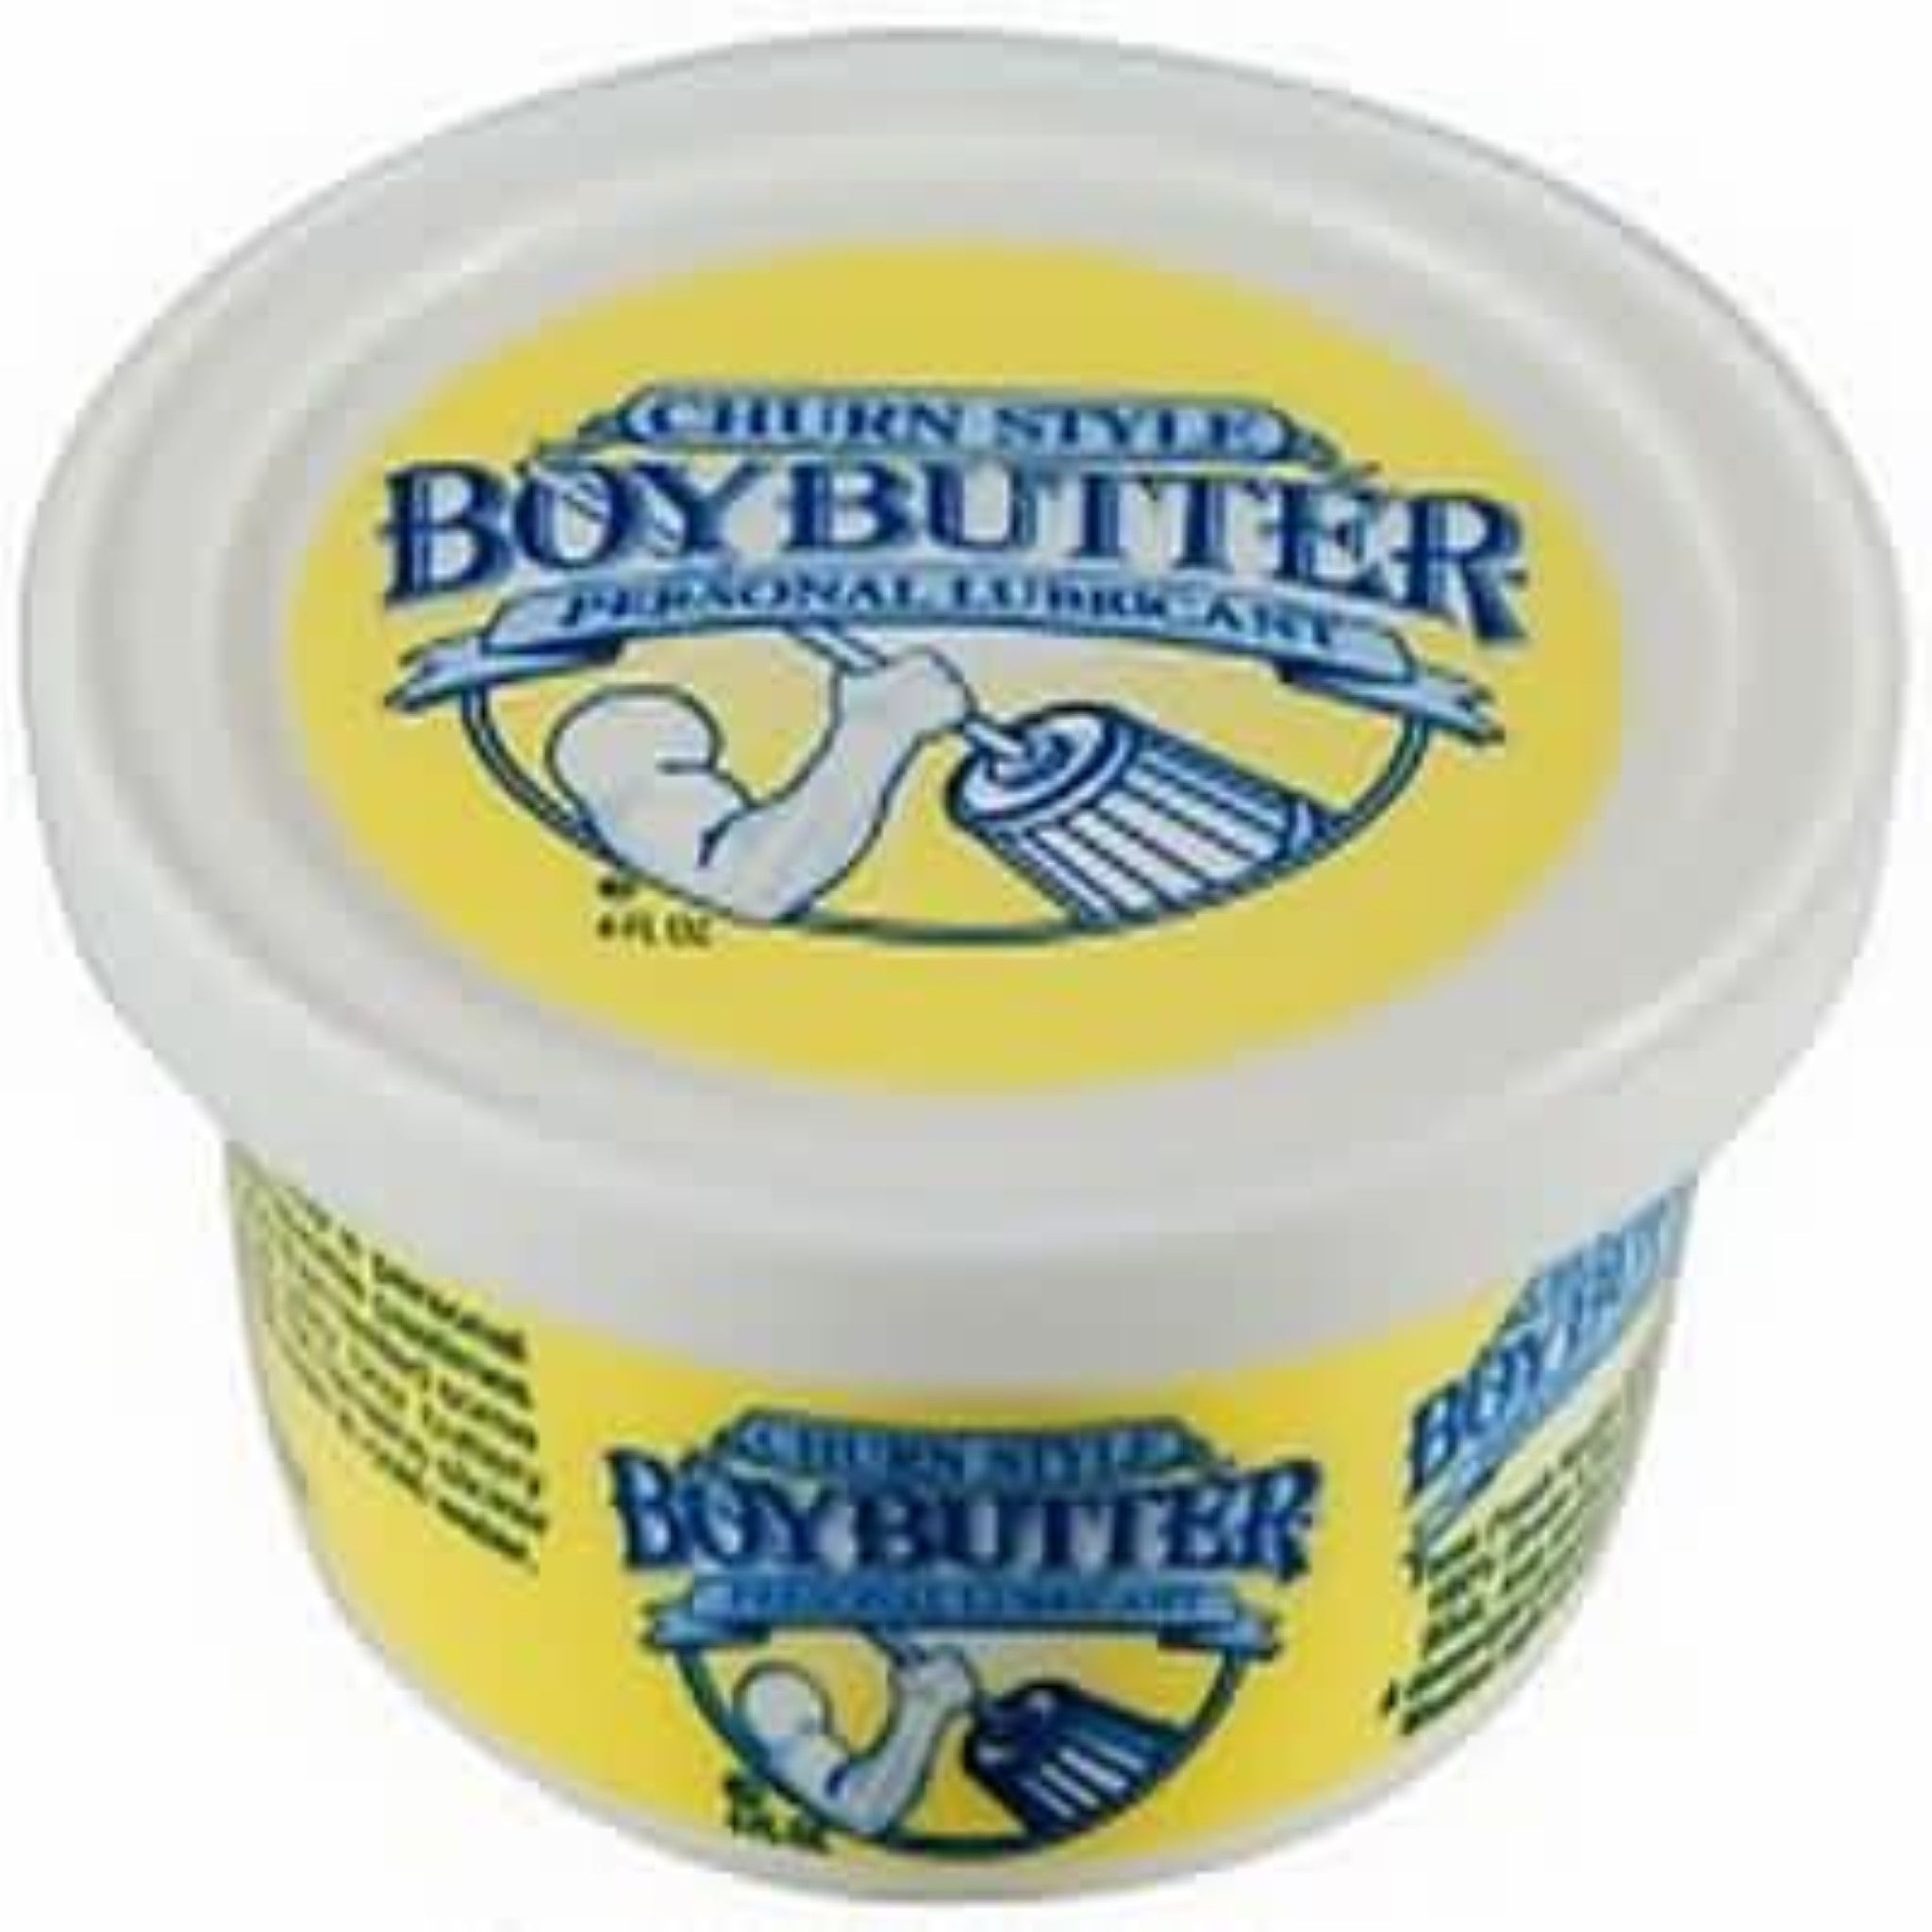 Buy Boy Butter 16 oz Personal Lubricant at